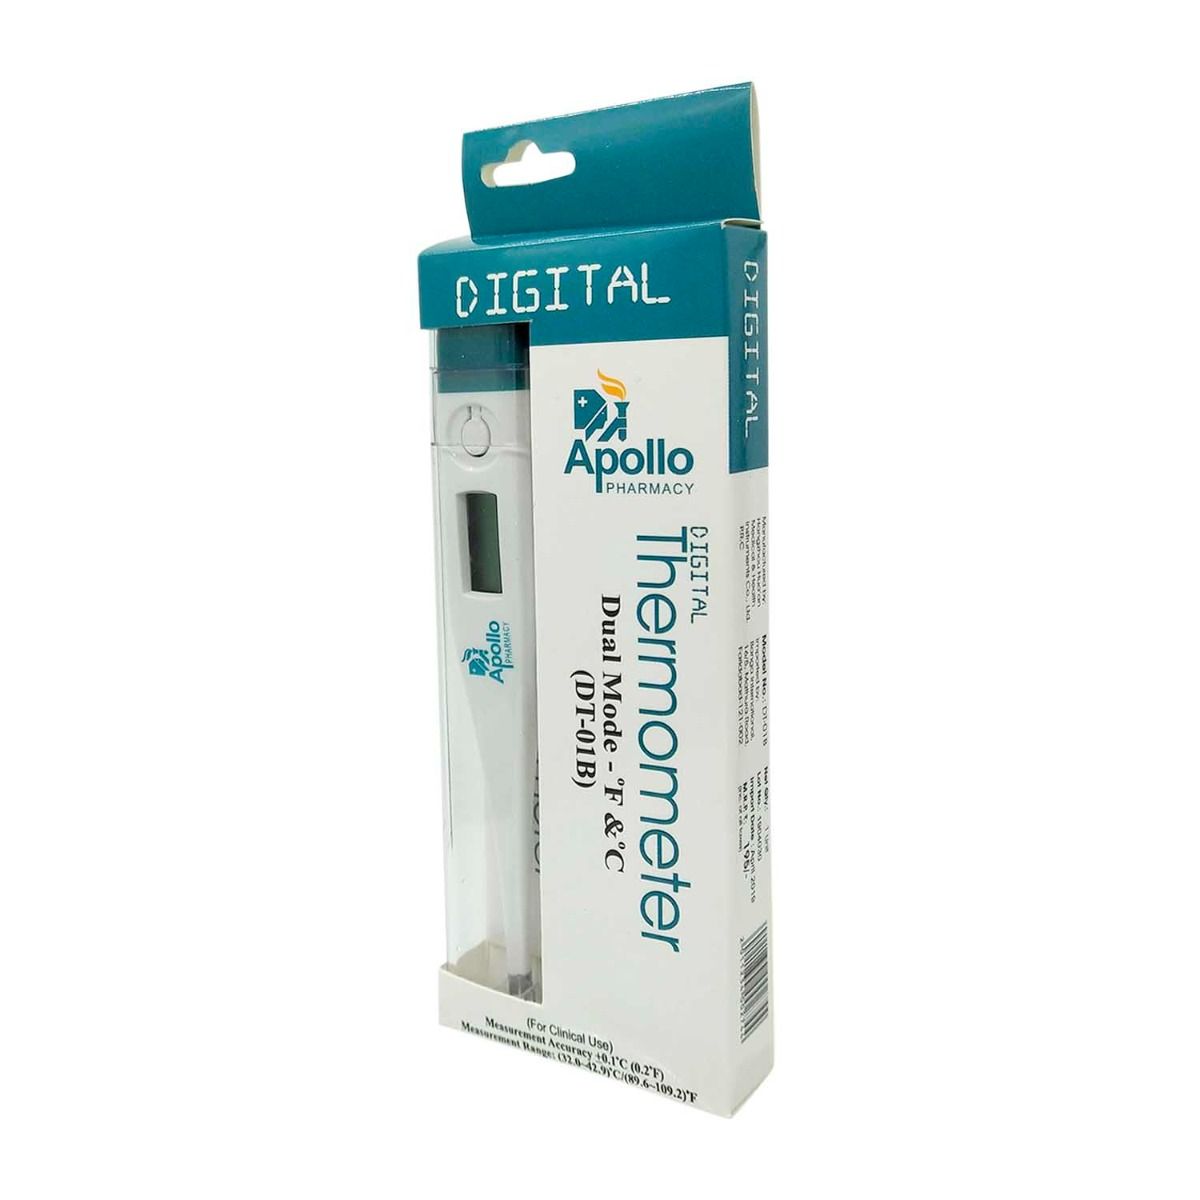 Apollo Pharmacy Digital Thermometer, 1 Count, Pack of 1 